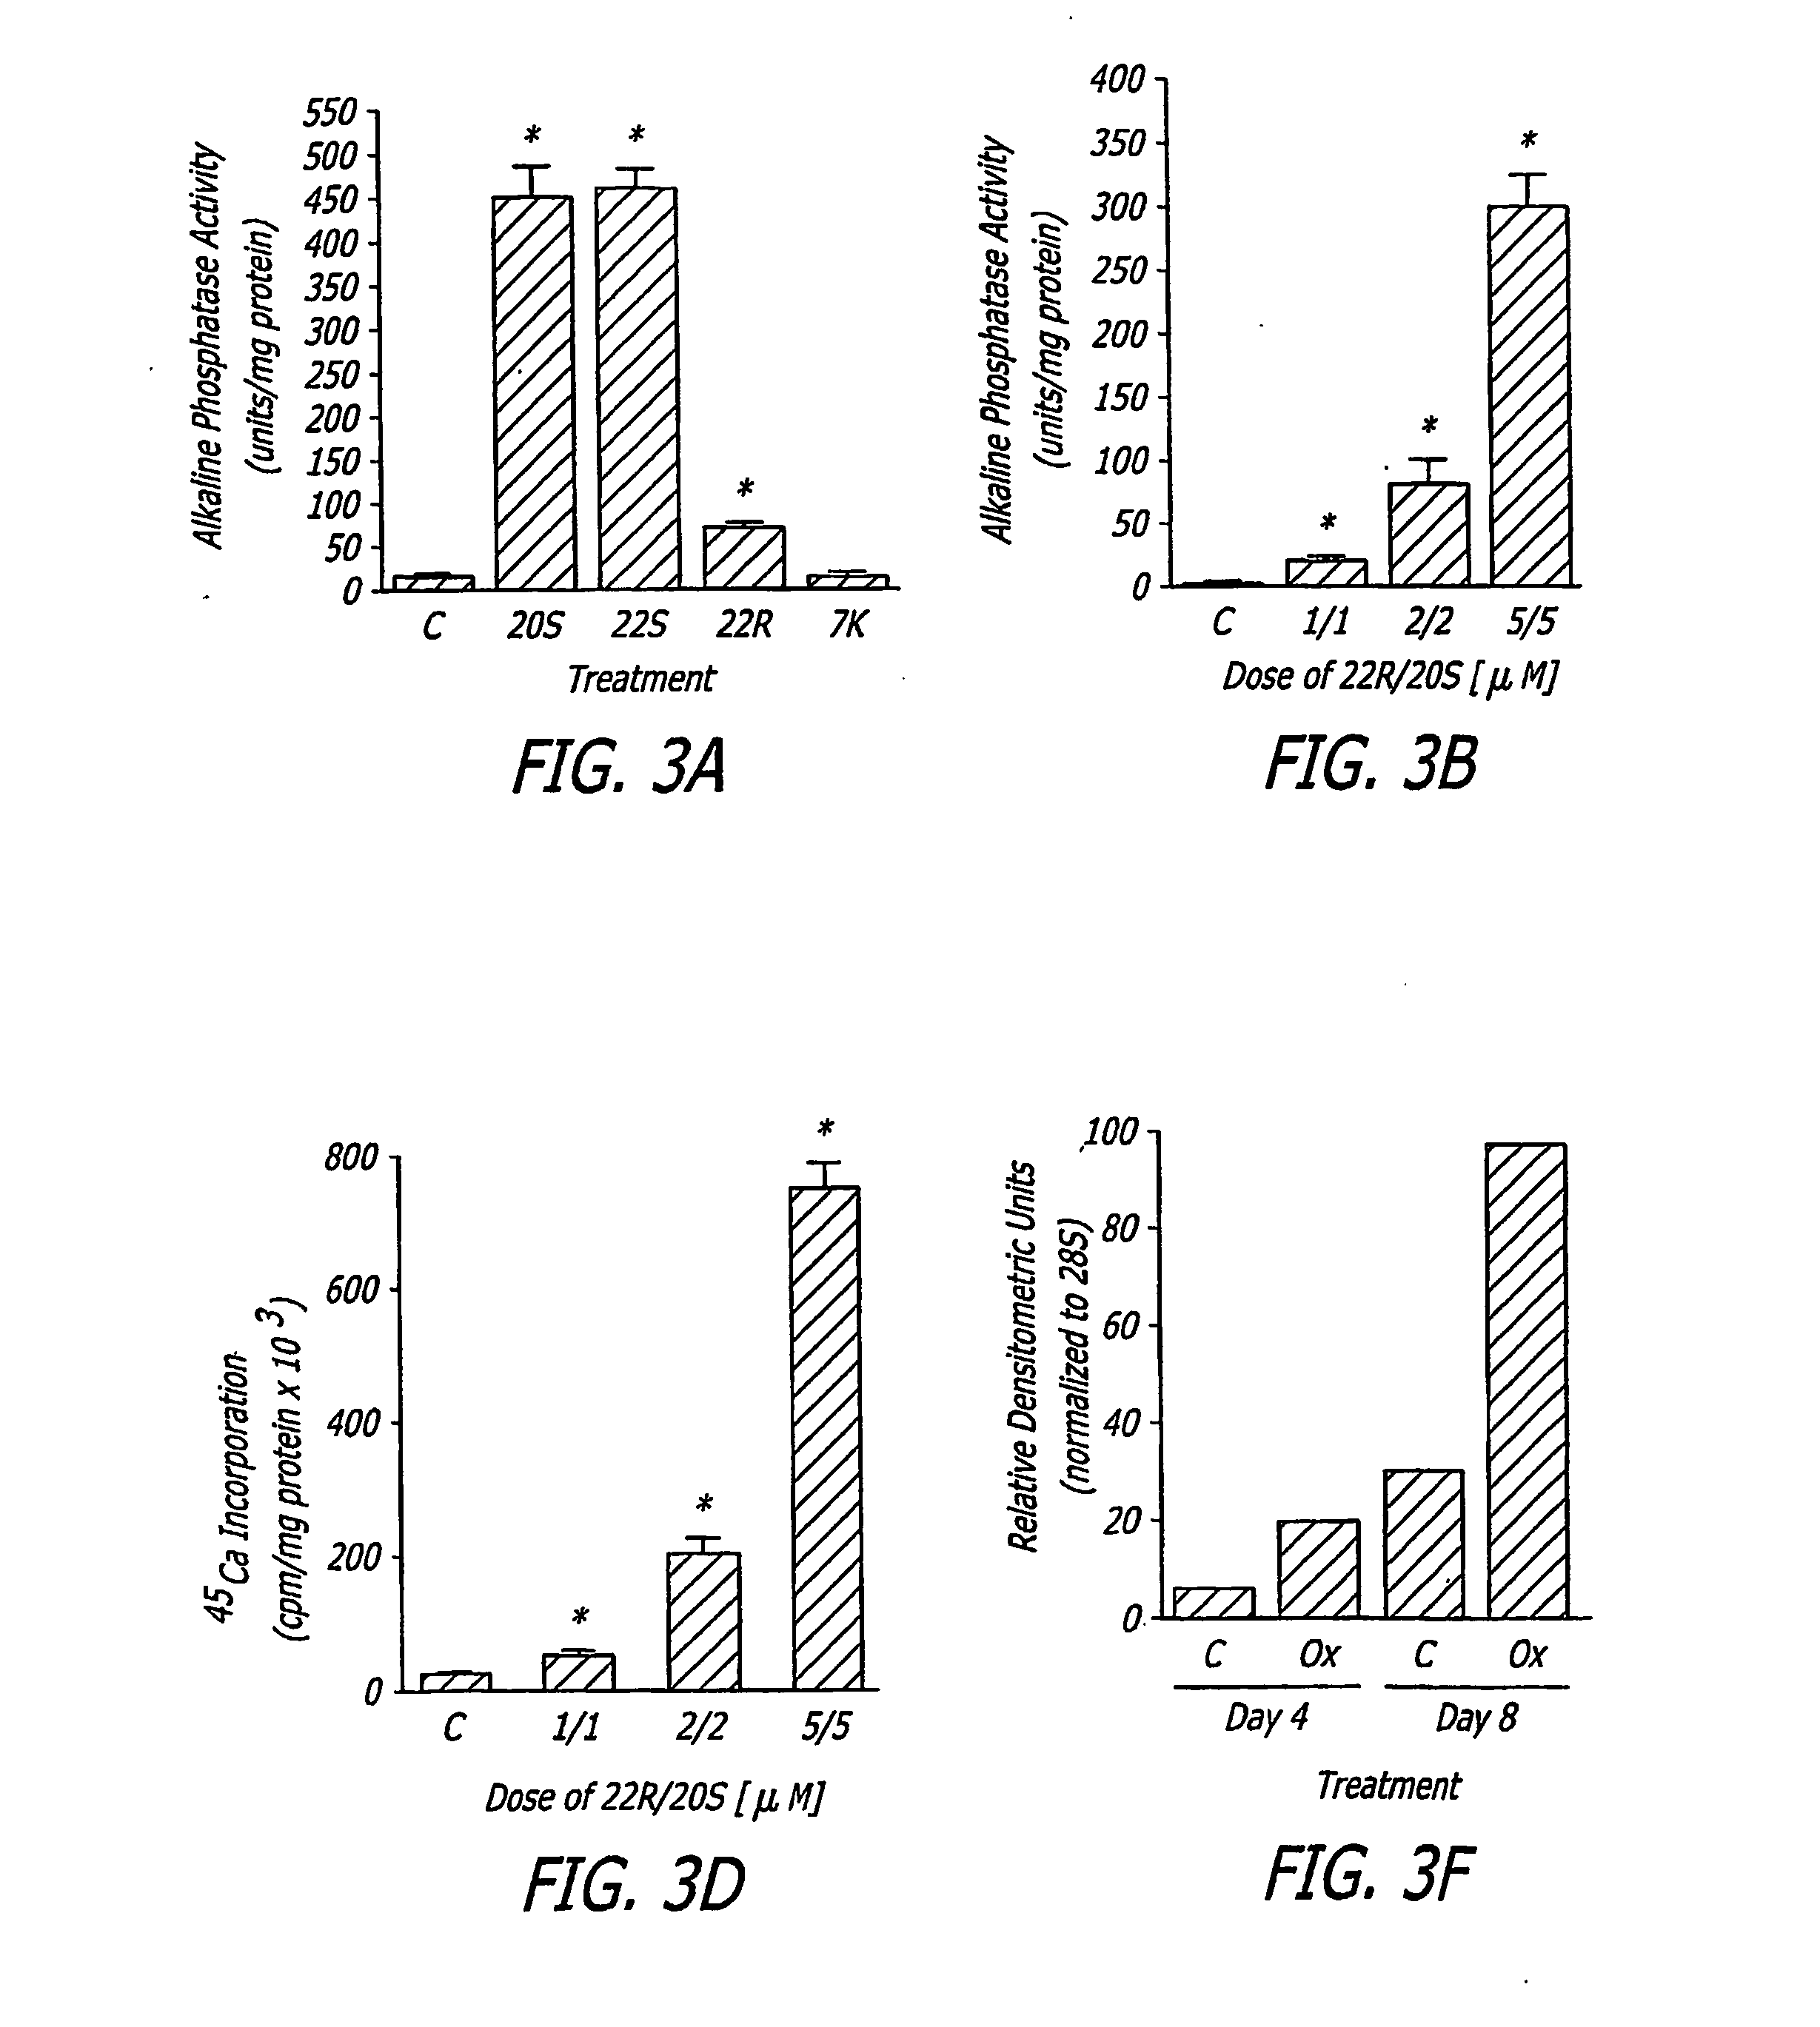 Agents and methods for enhancing bone formation